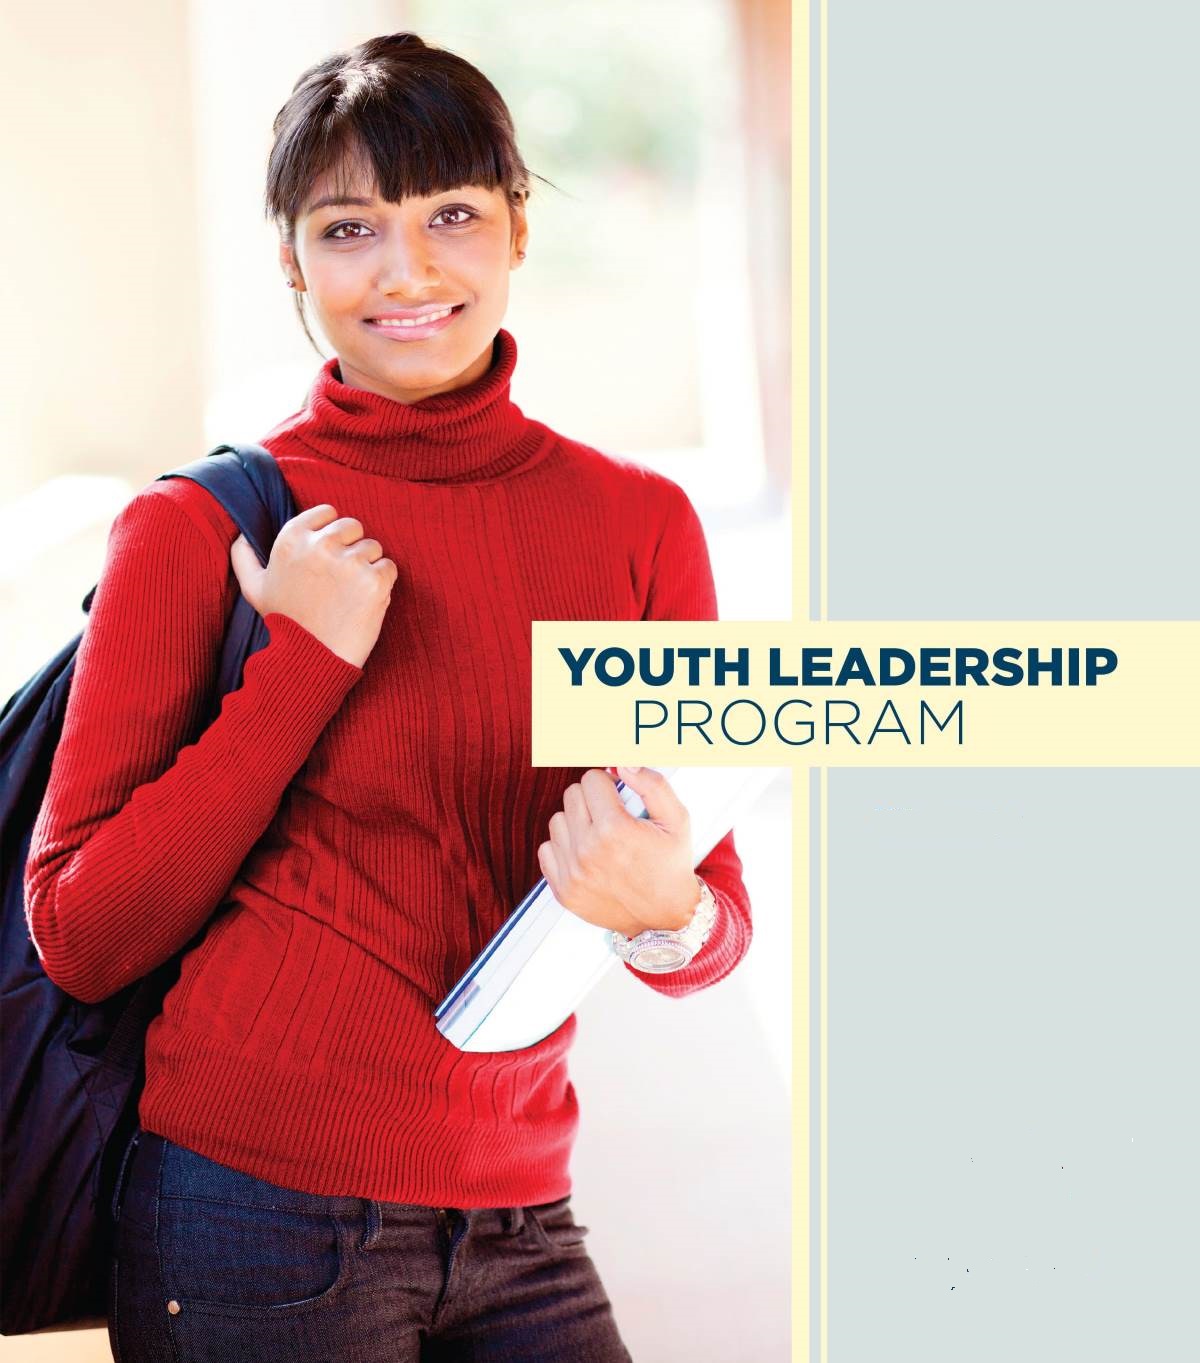 How To Apply for the American Youth Leadership Program